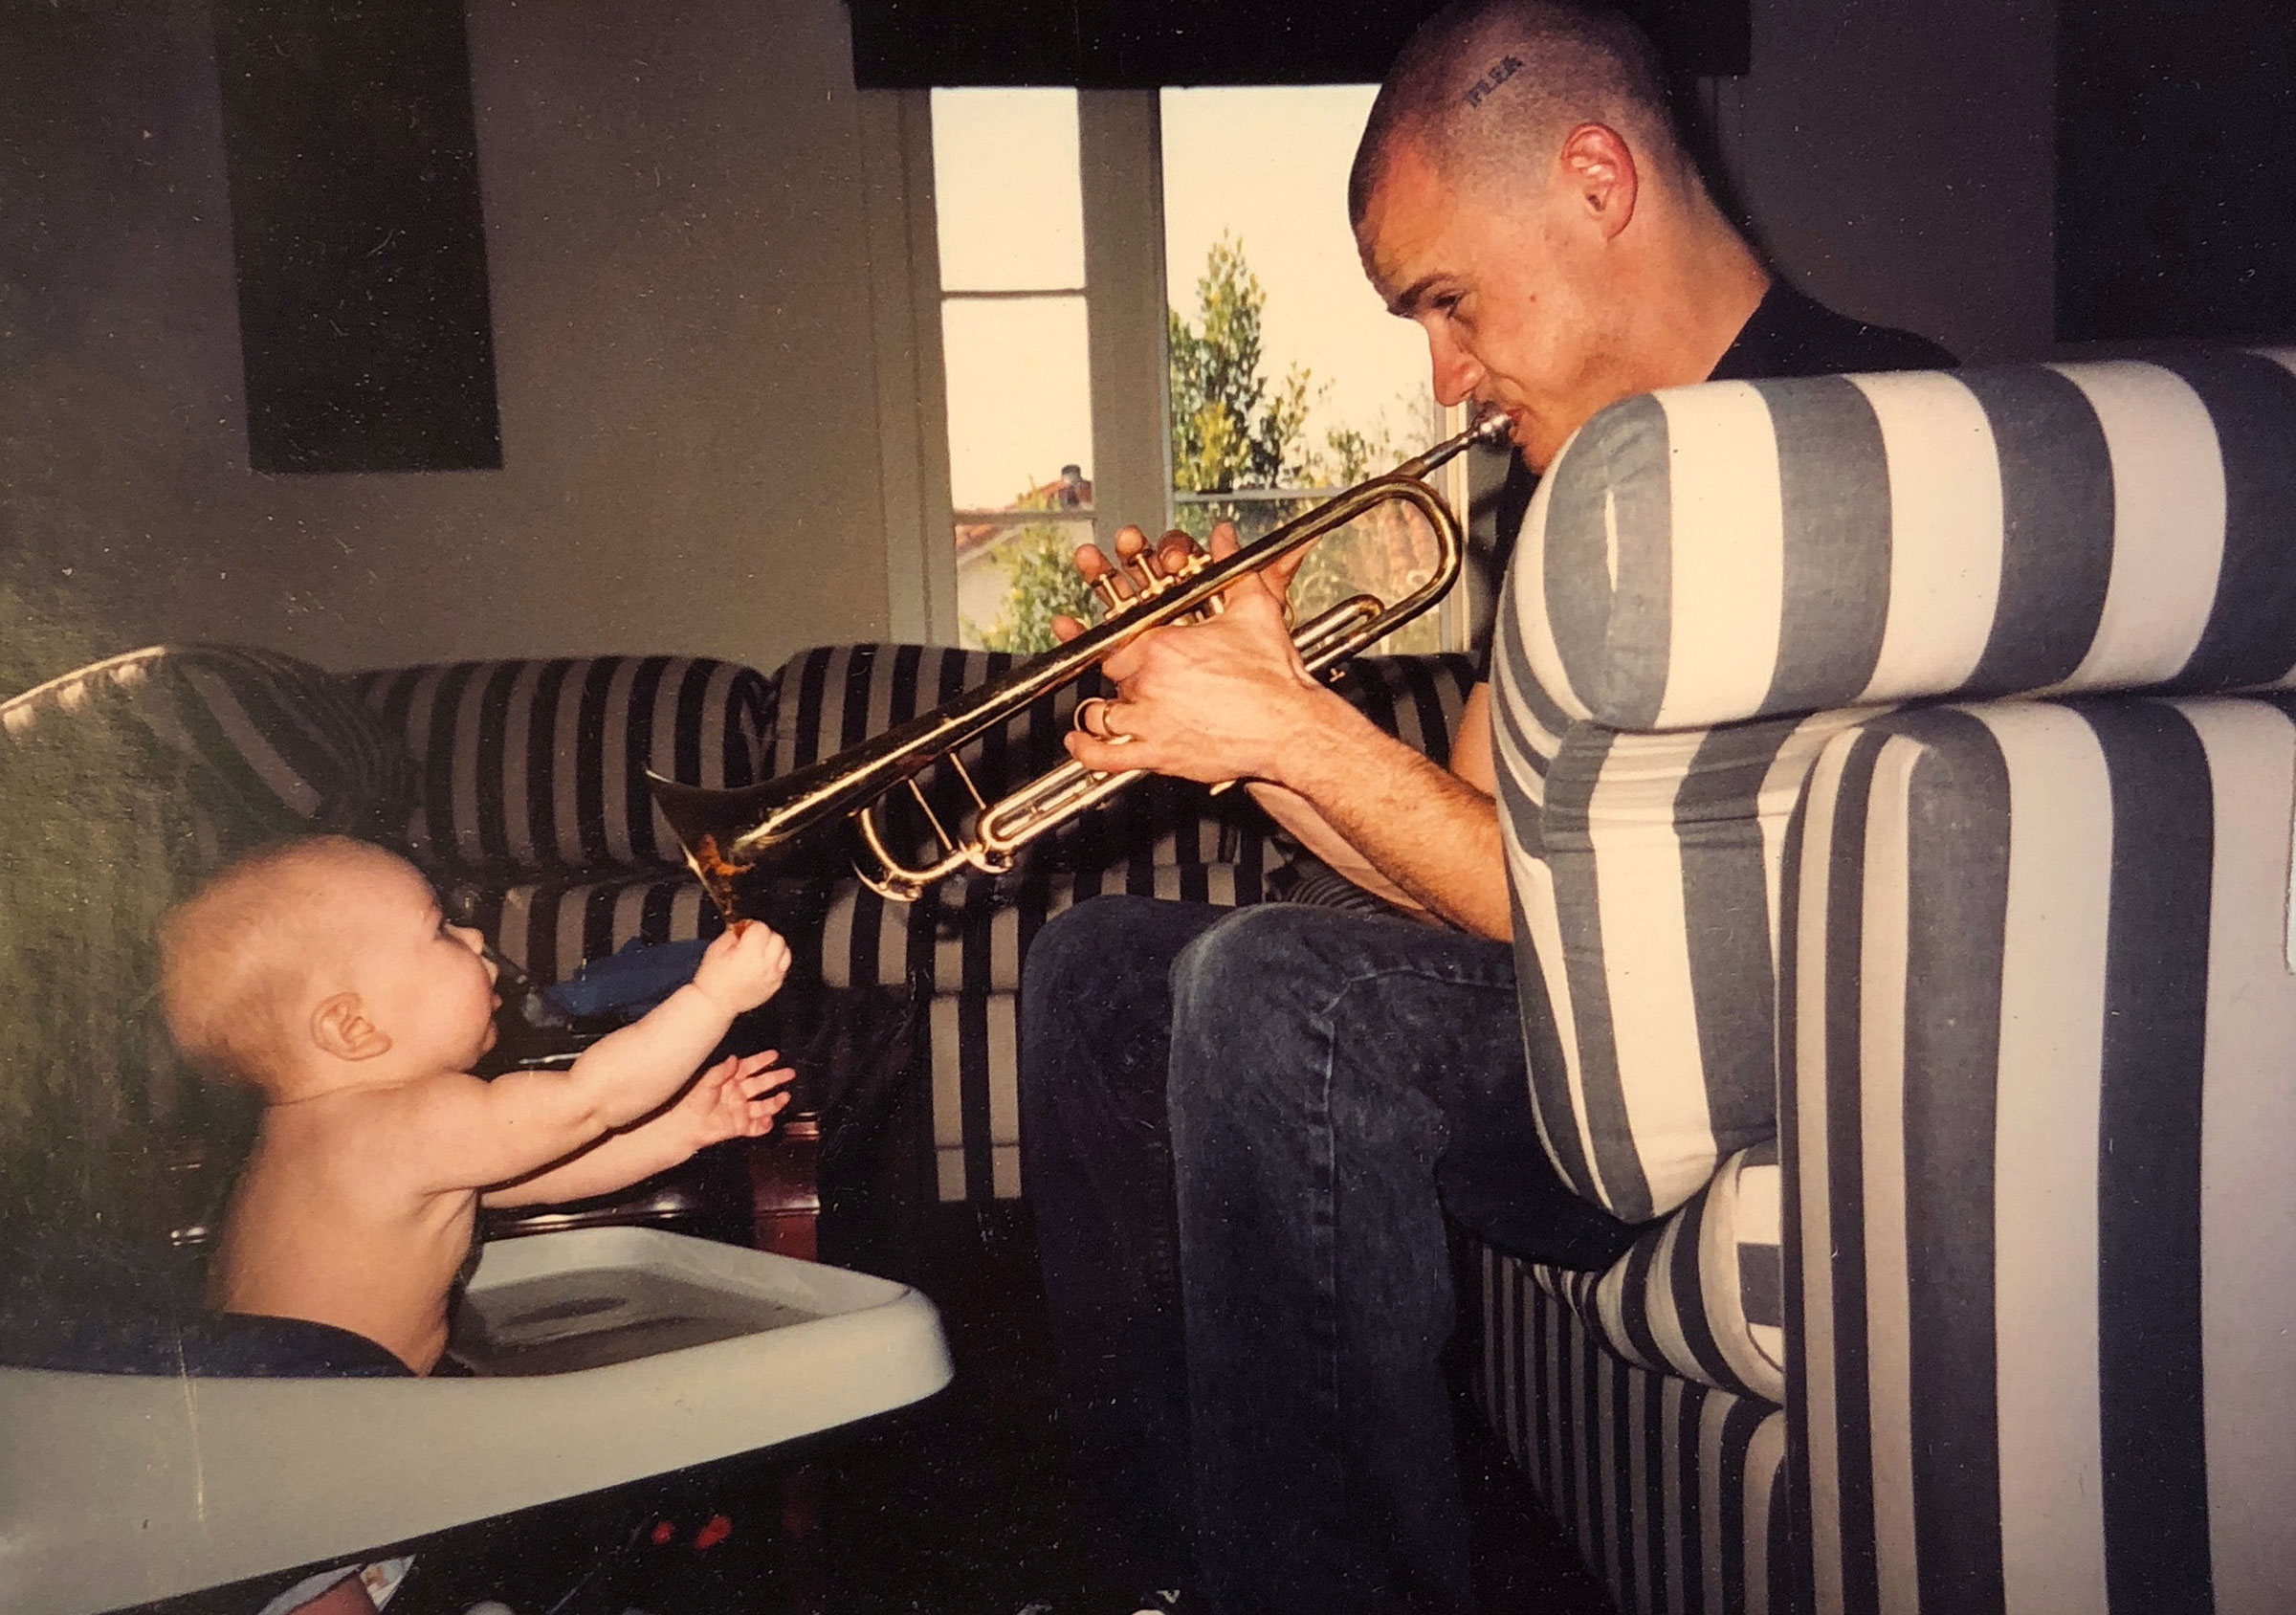 Flea at age 26 with his one year old daughter, Clara Balzary. (Courtesy of Flea)